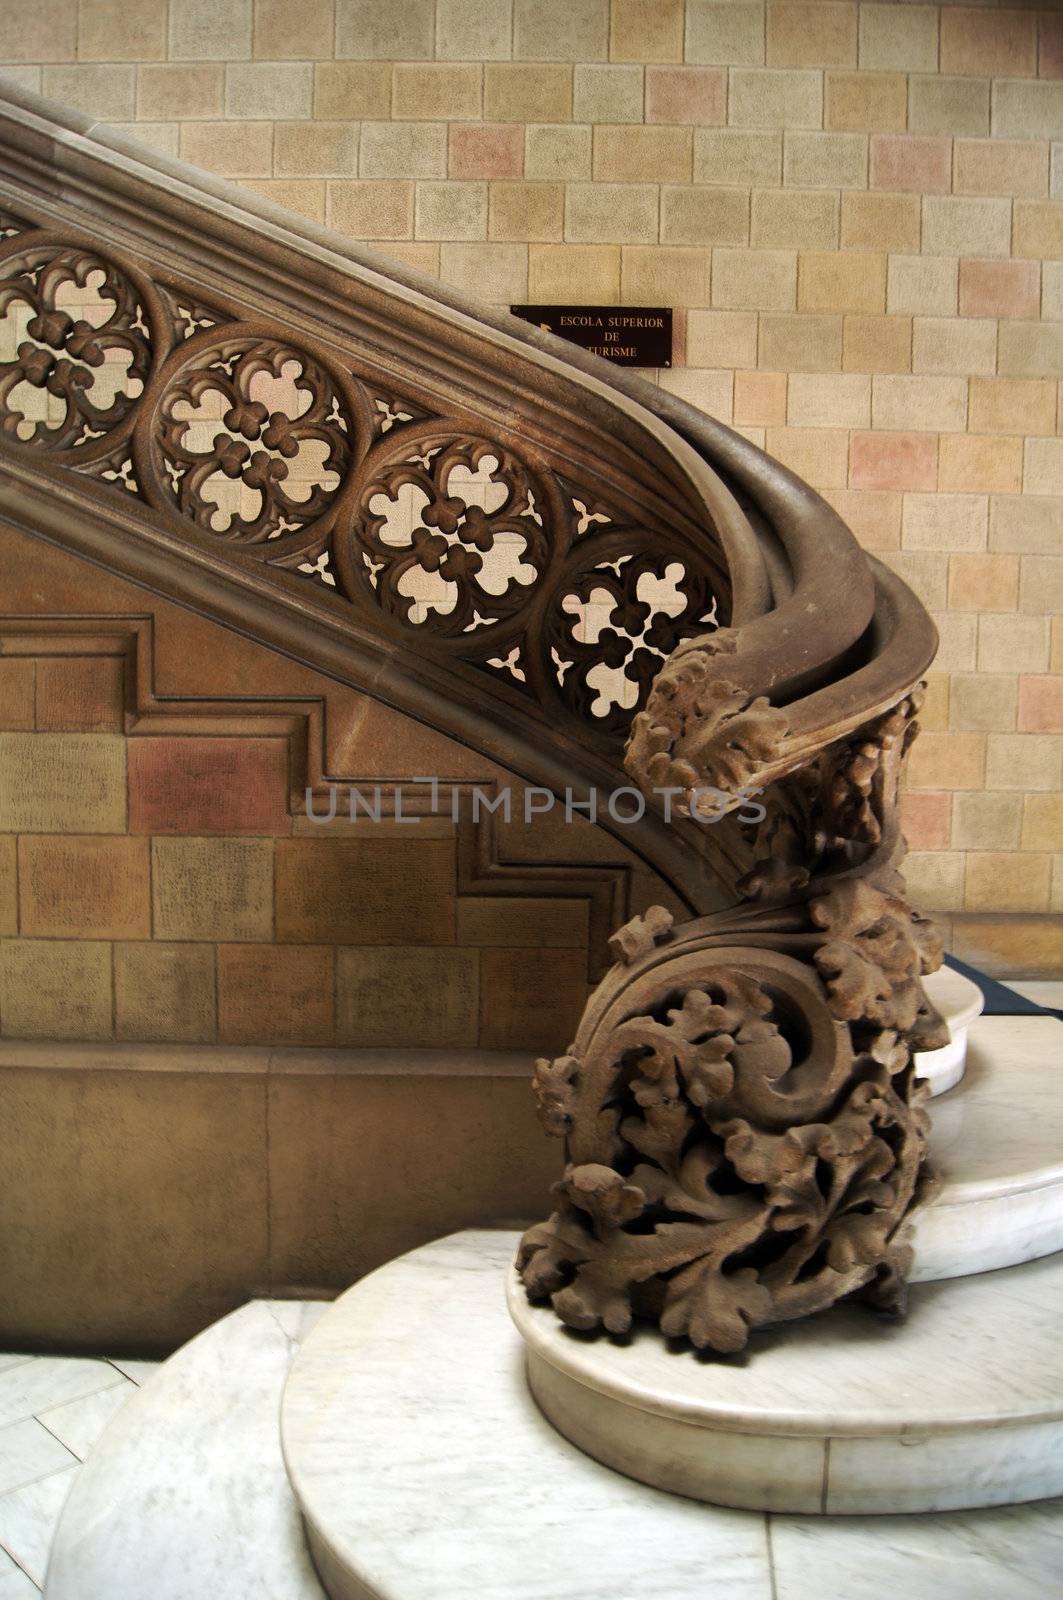 Barcelona: famous stairs in Casa Fuster on Passeige de Gracia by Elet